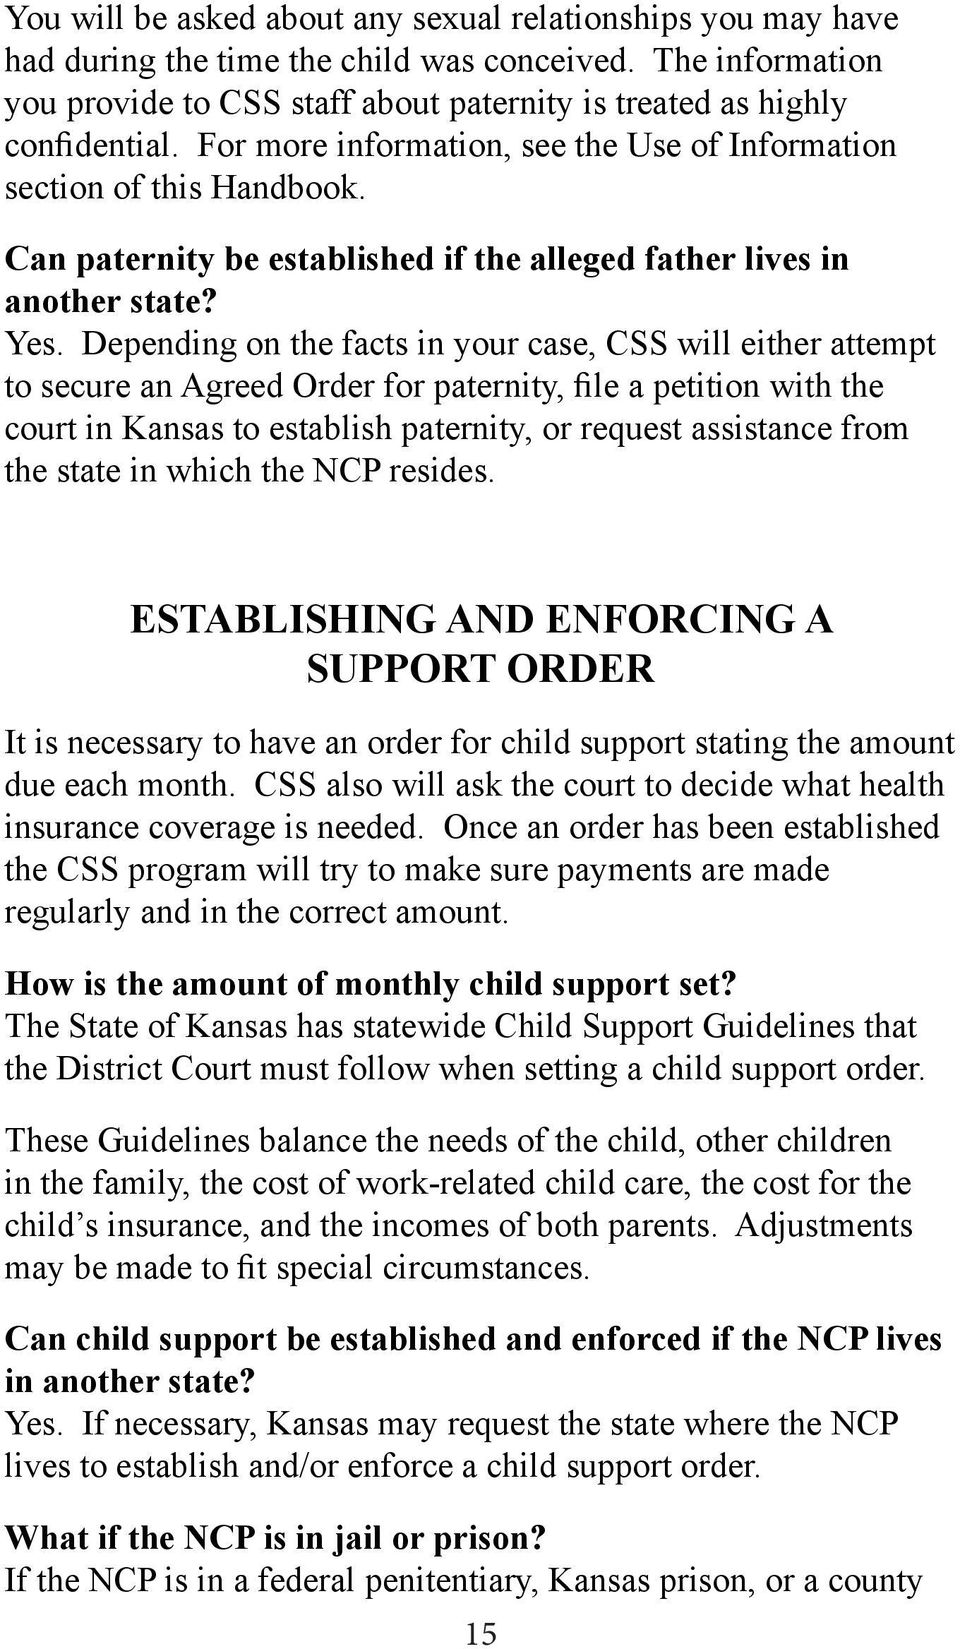 Depending on the facts in your case, CSS will either attempt to secure an Agreed Order for paternity, file a petition with the court in Kansas to establish paternity, or request assistance from the